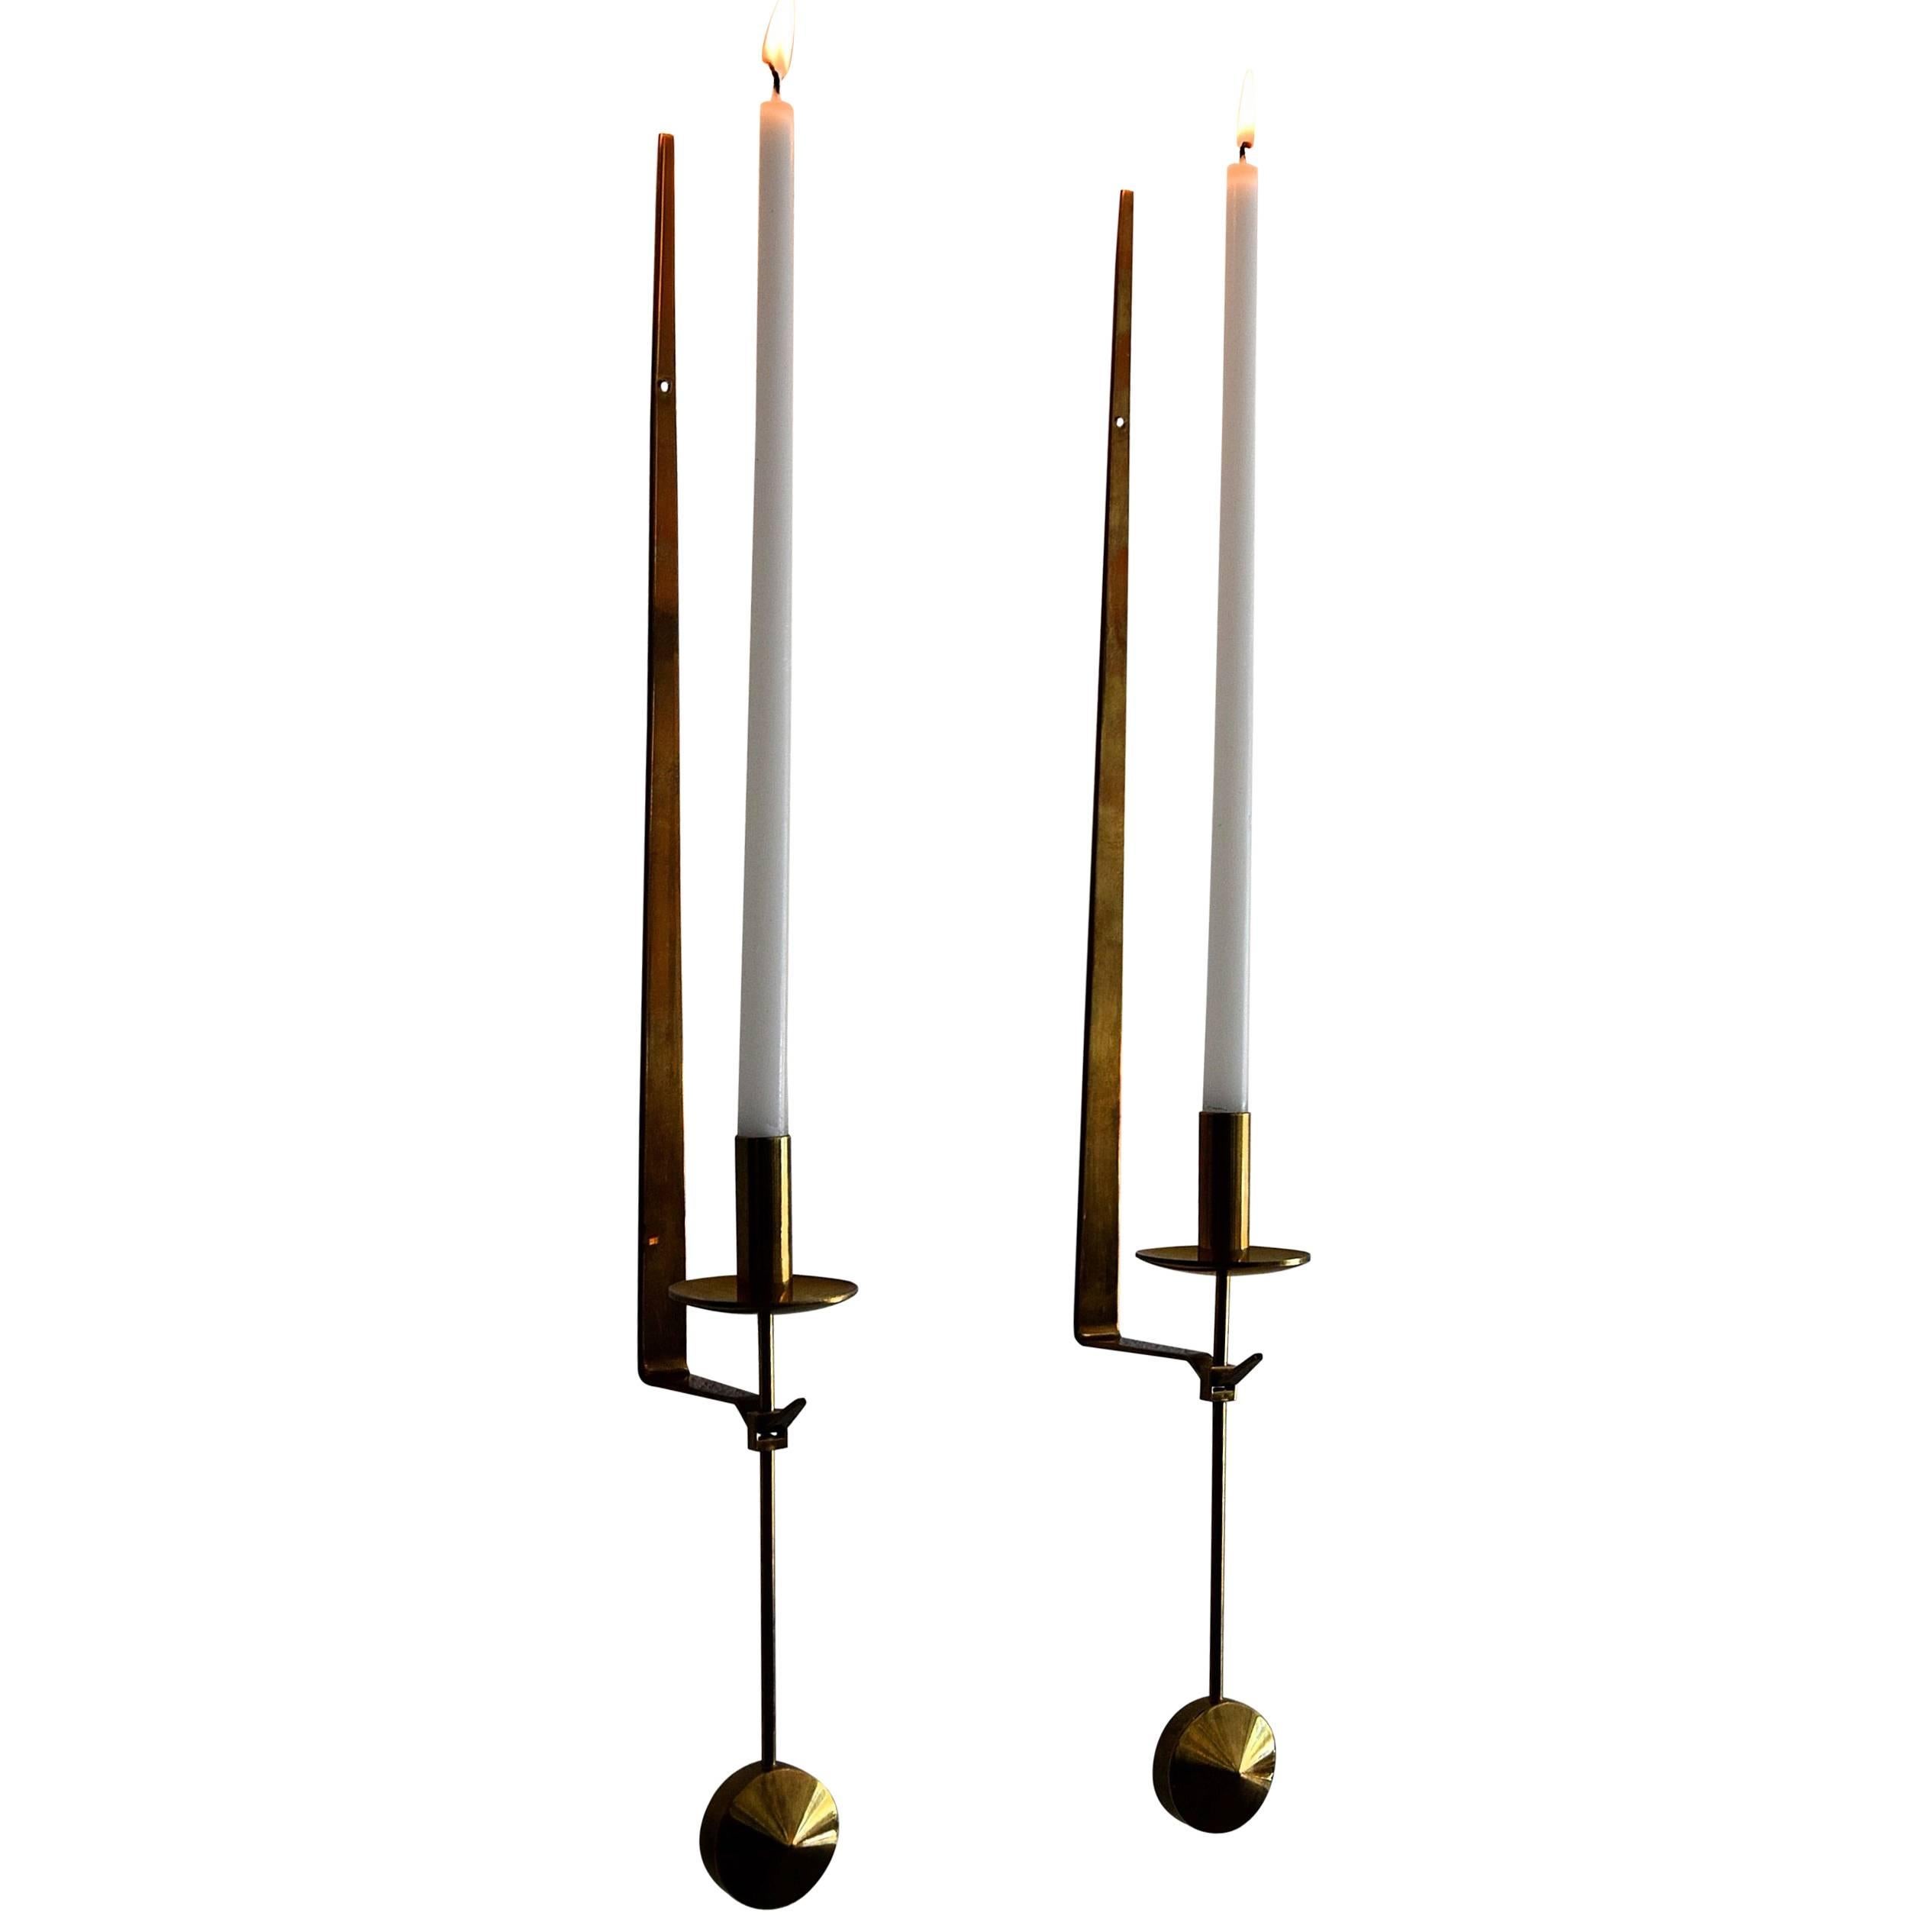 Pair of Candle Sconces by Pierre Forssell for Skultuna